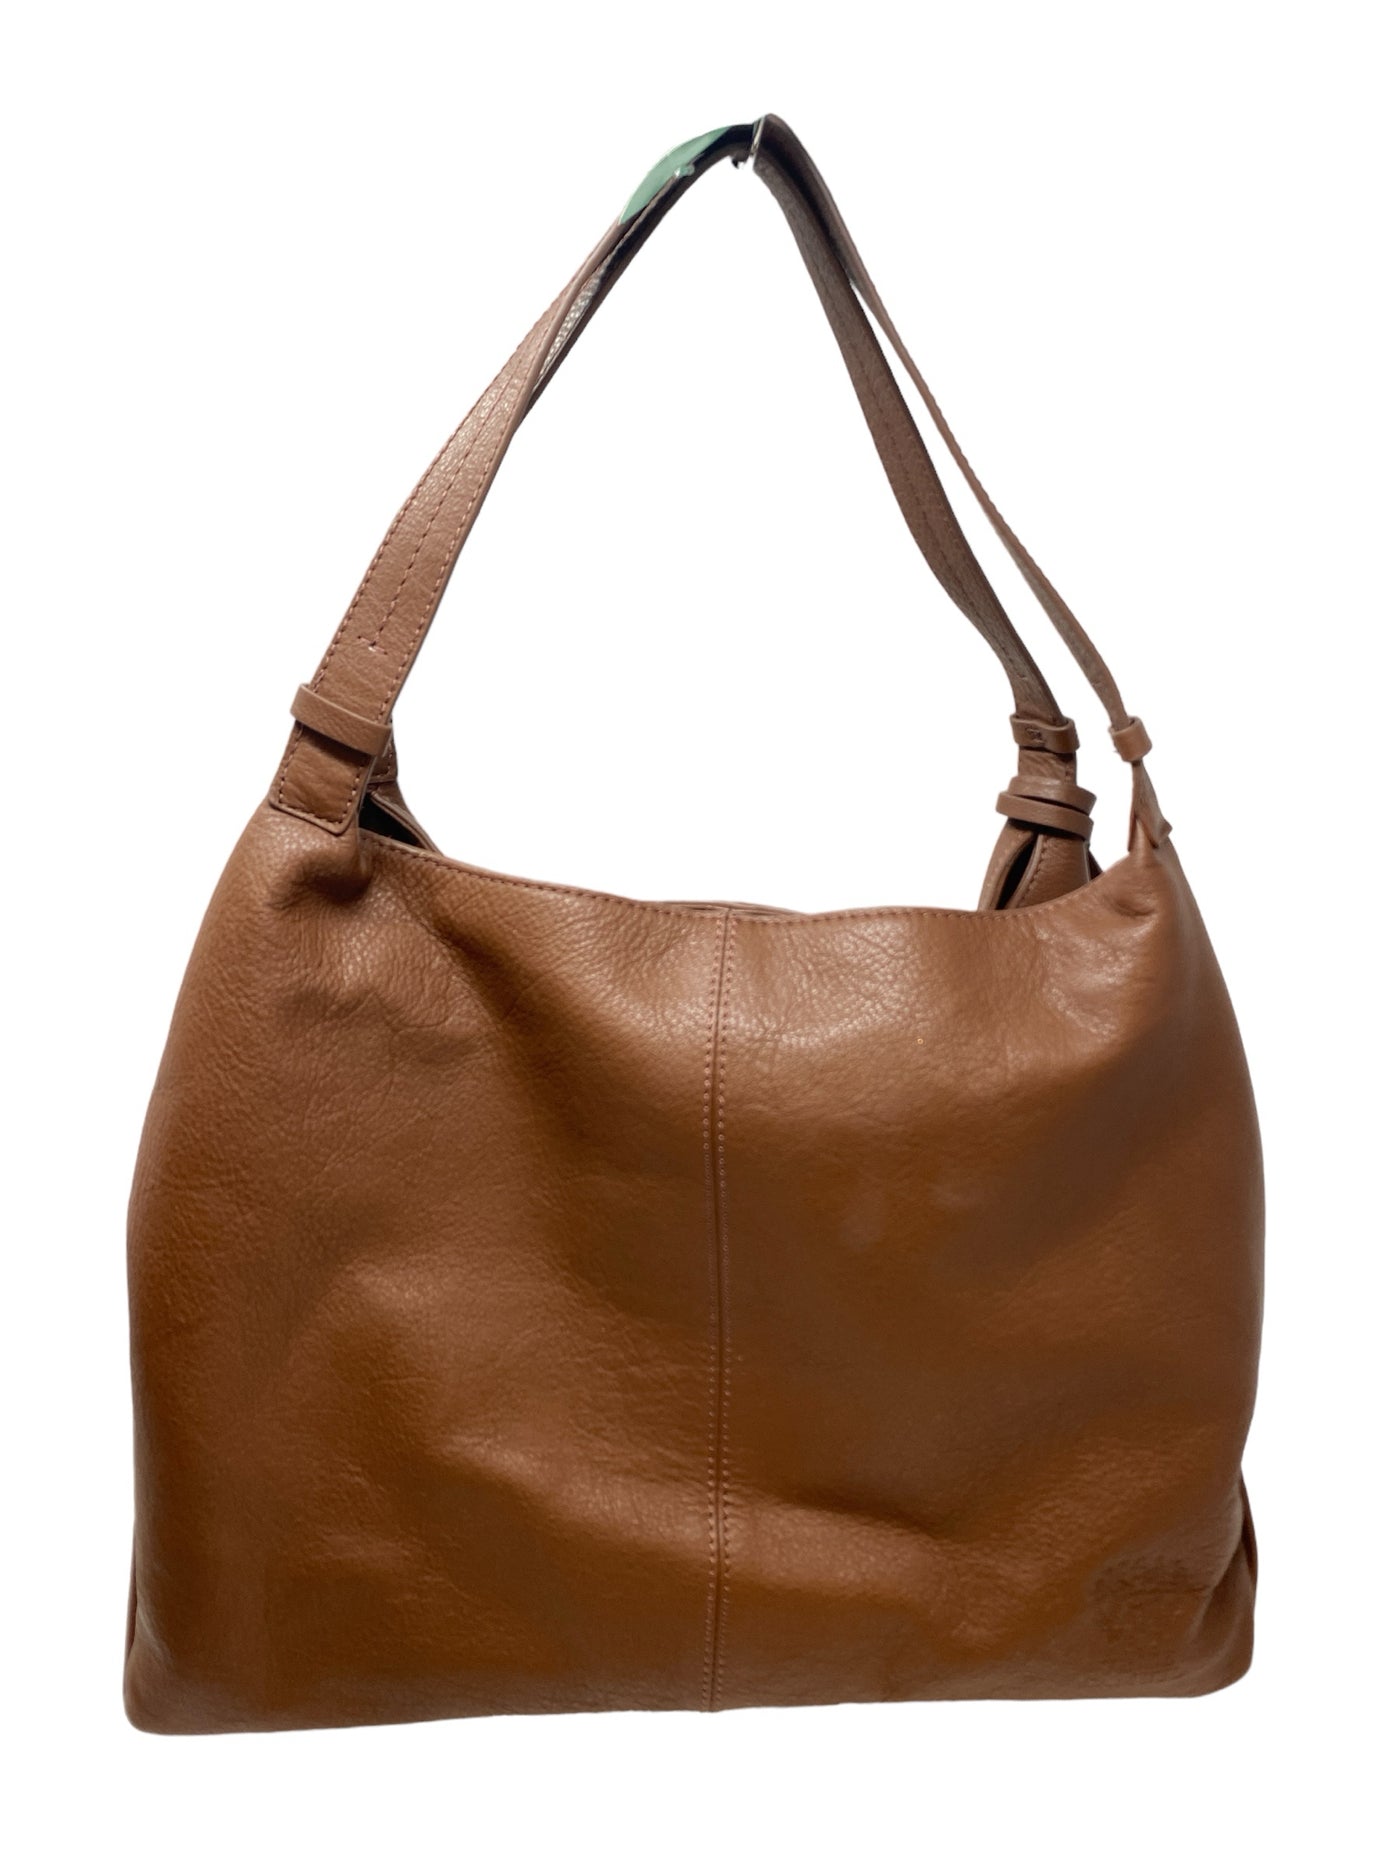 Vince Camuto Brown Purse